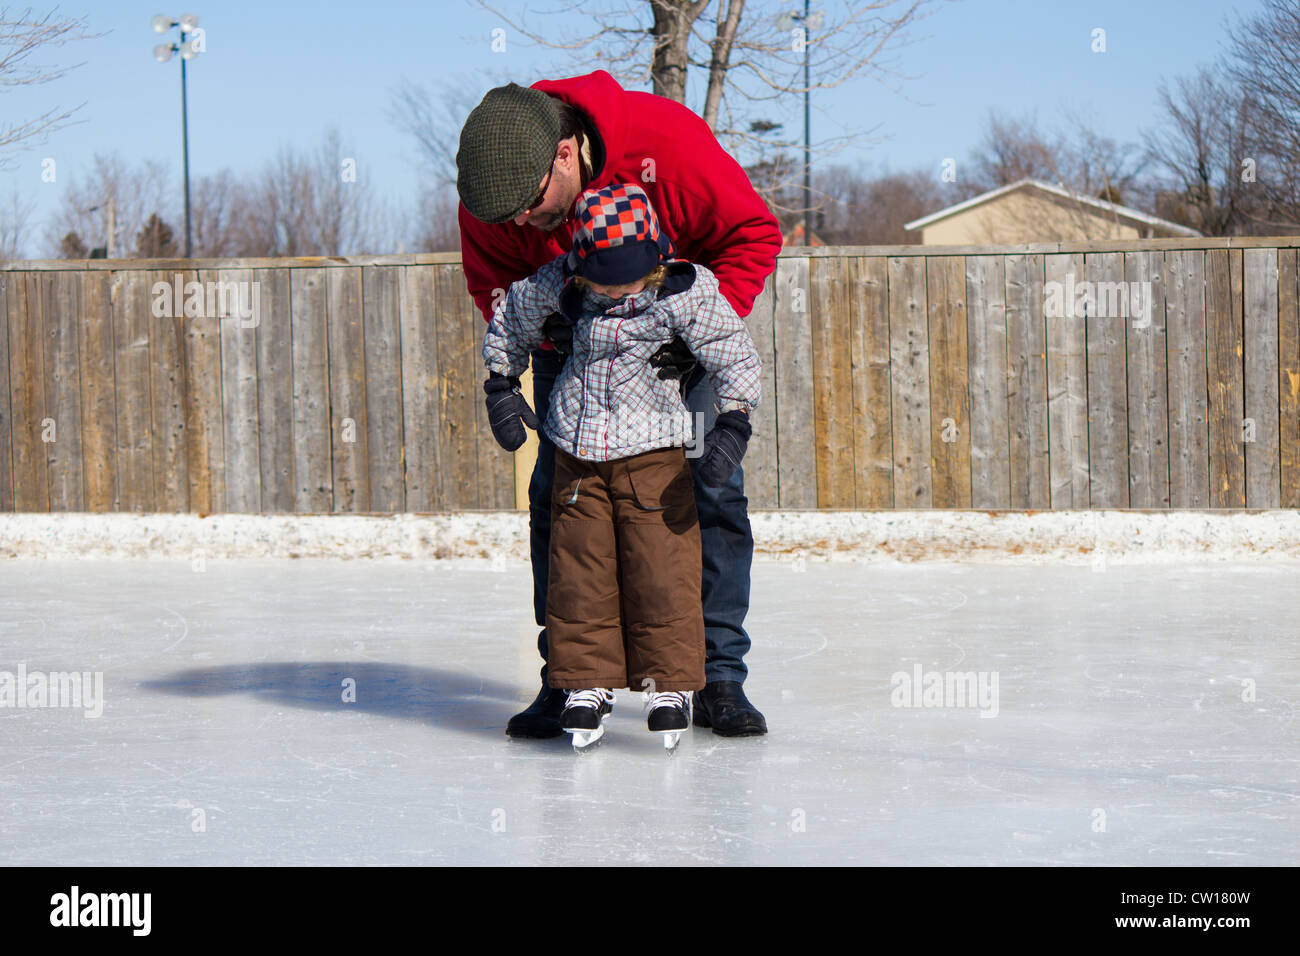 Father teaching son how to ice skate at an outdoor skating rink in winter. Stock Photo